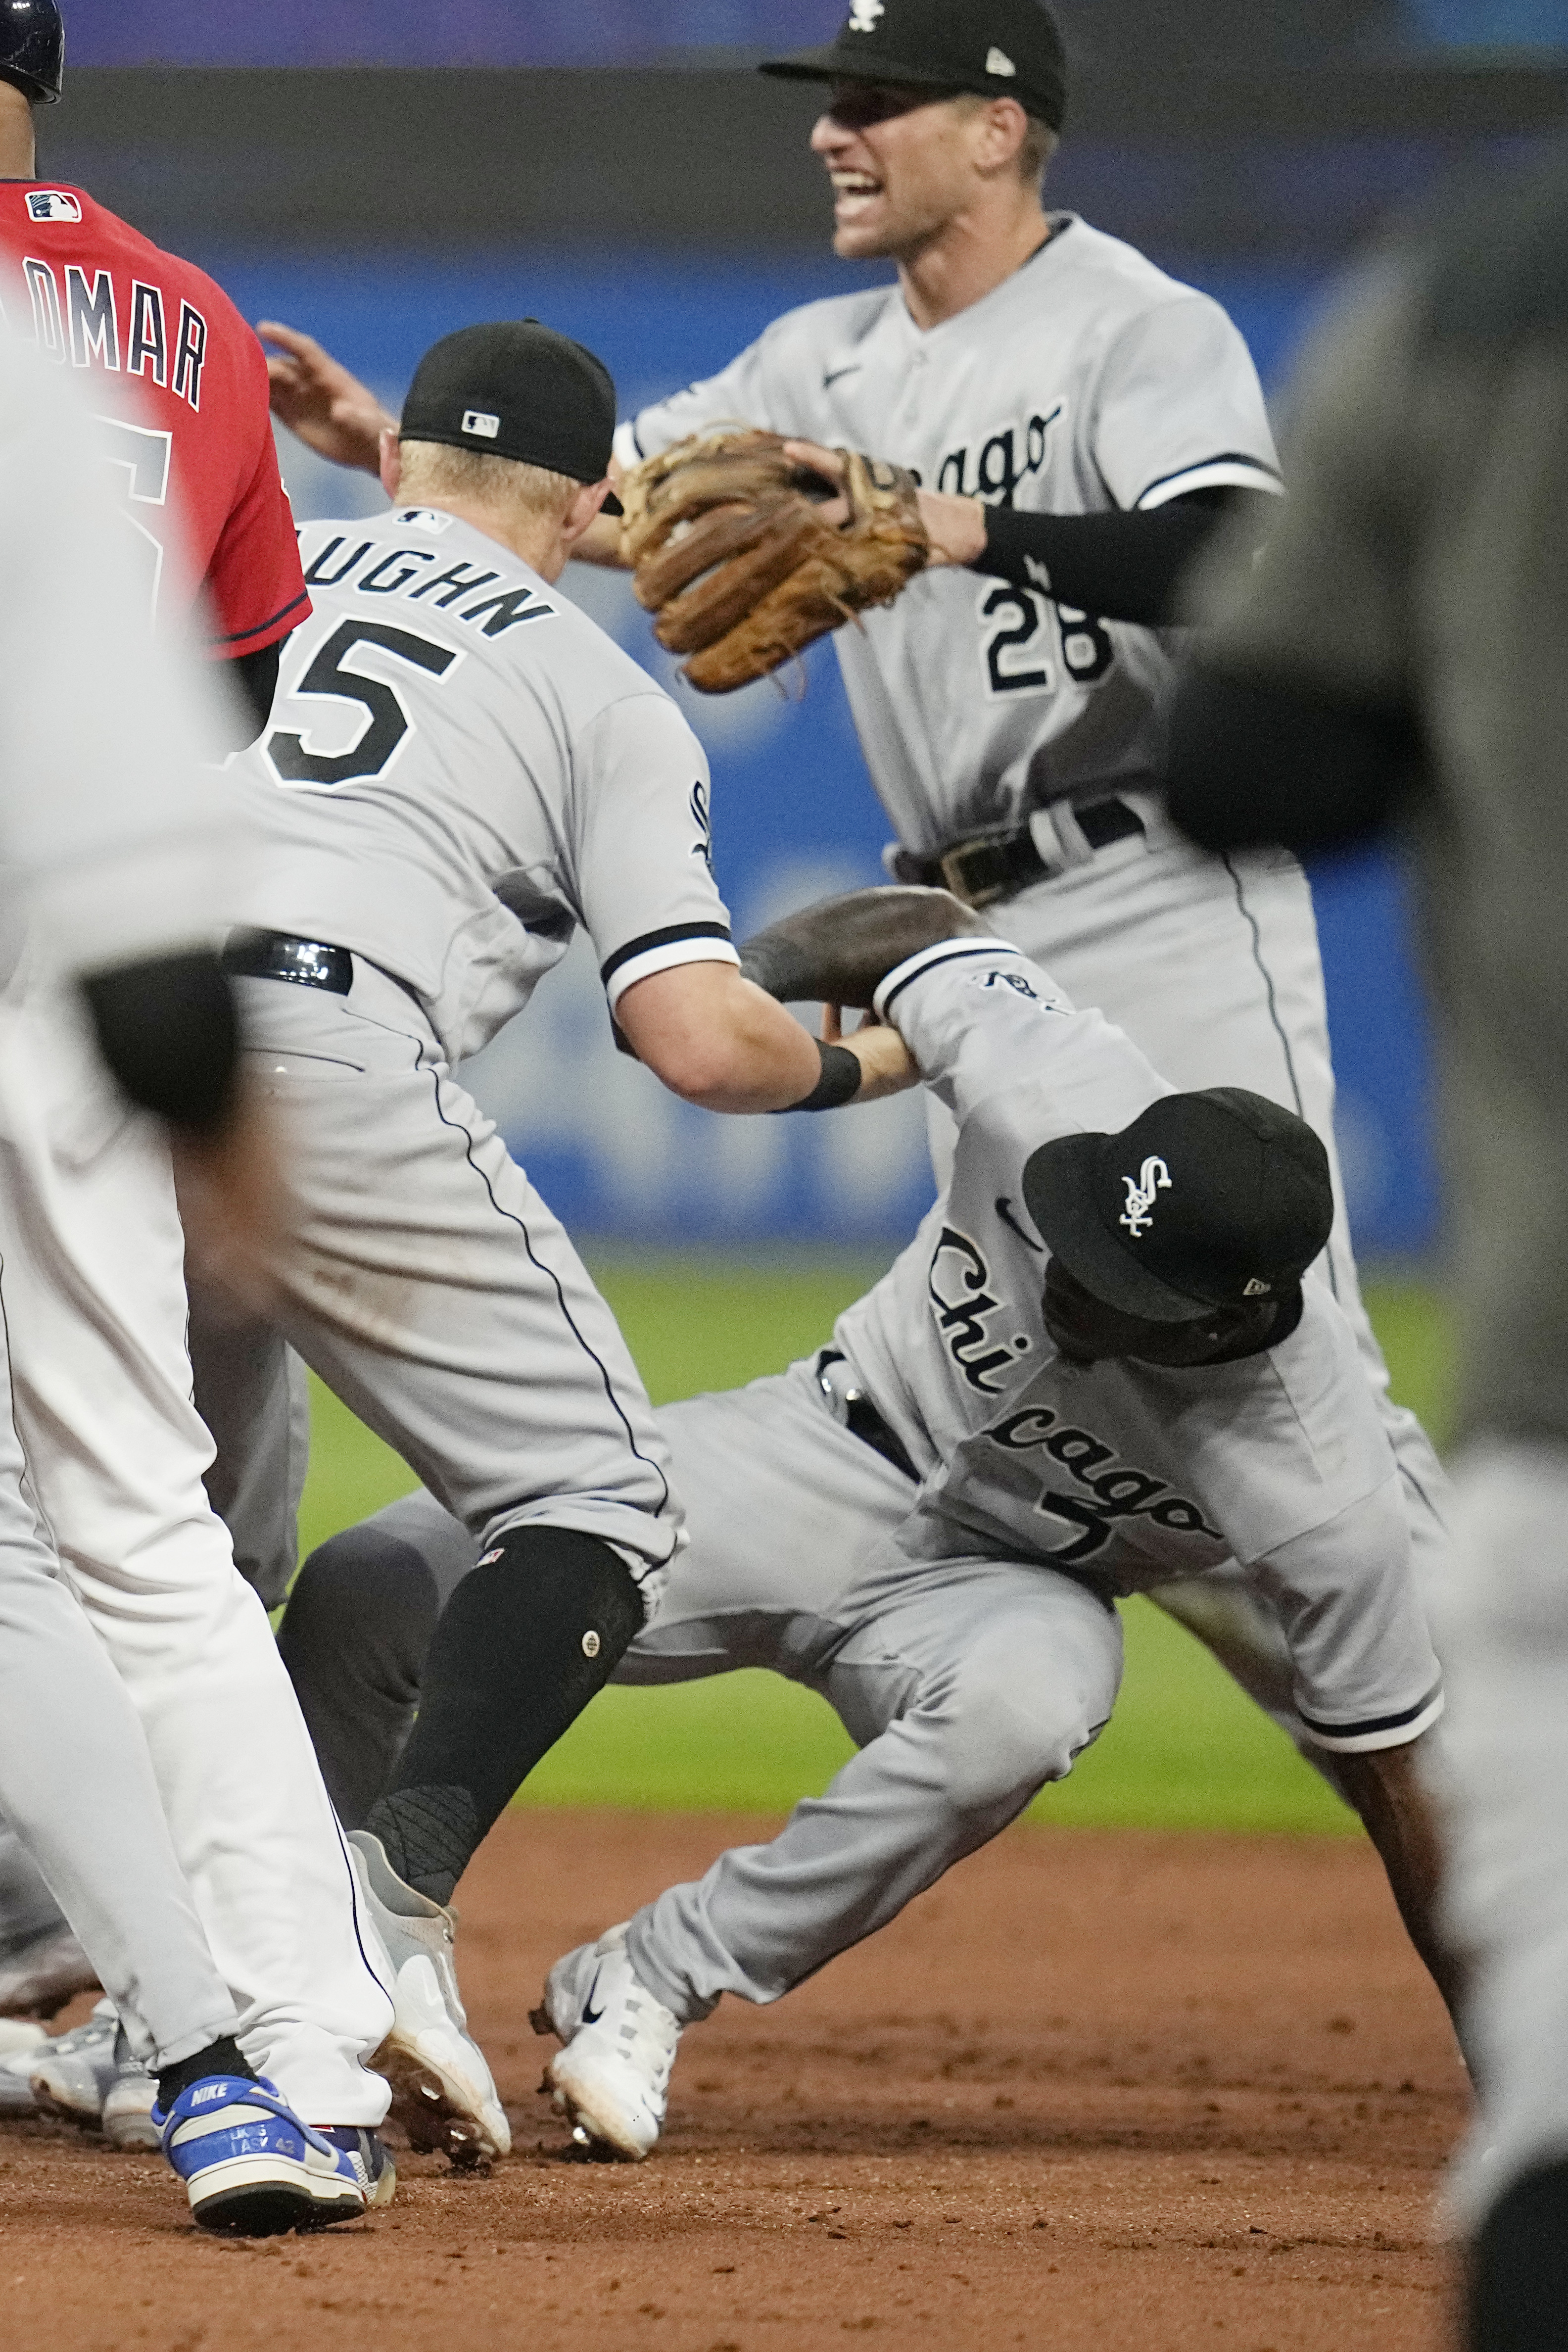 White Sox-Guardians game delayed after brawl, 6 ejected